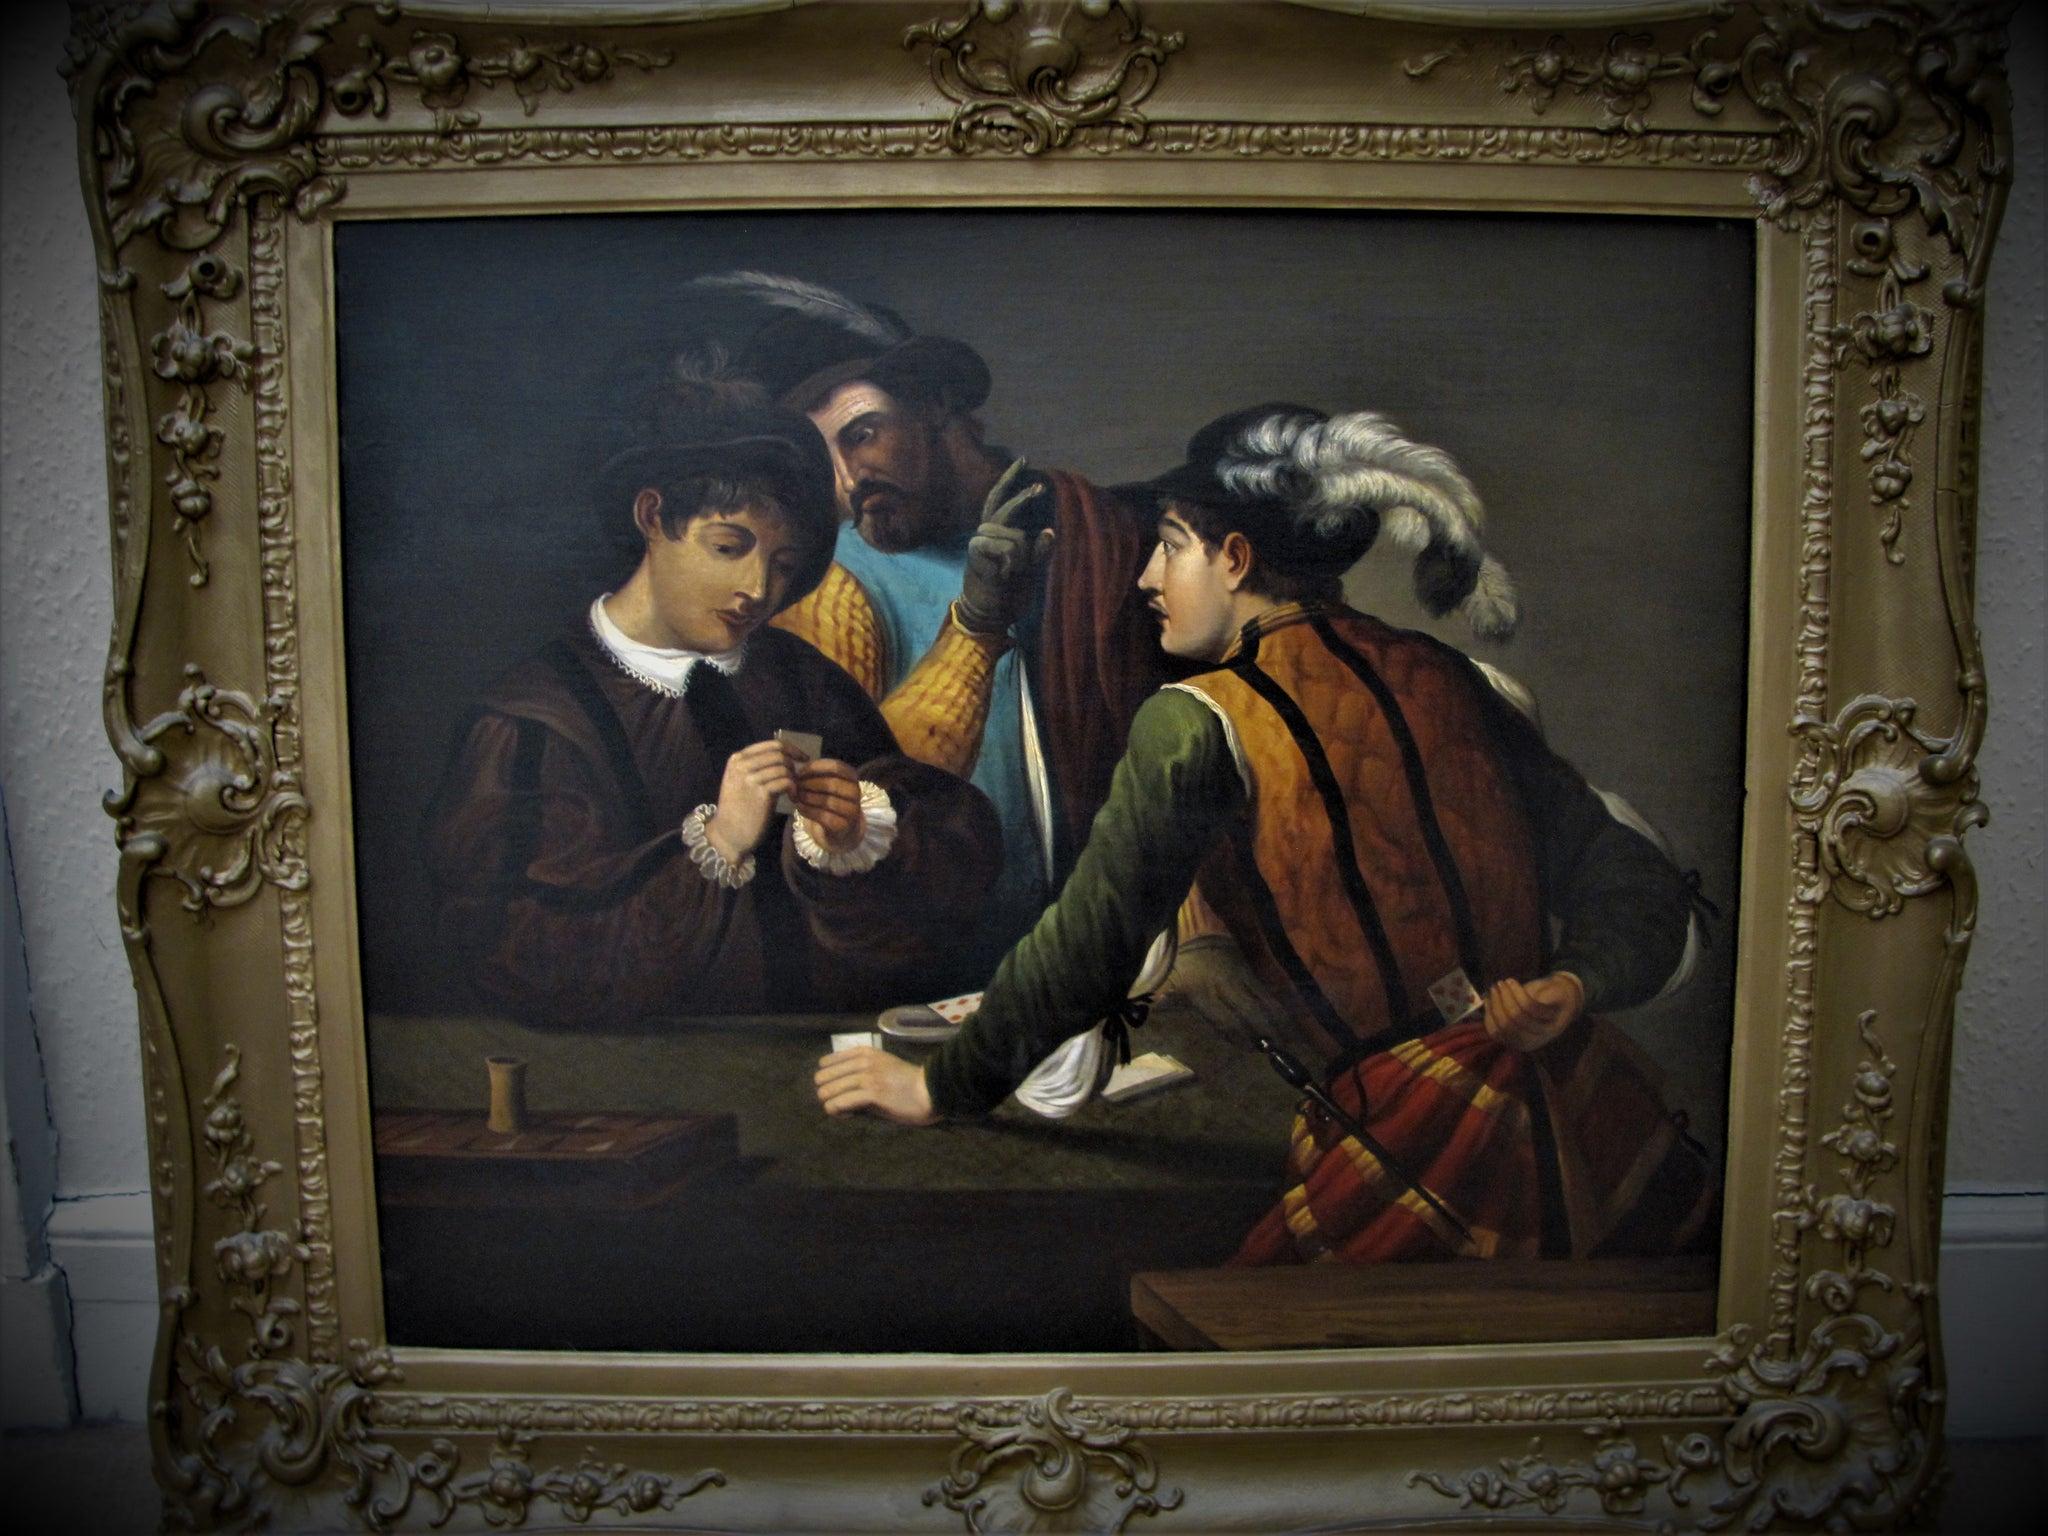 19th Century portrait after caravaggio "The Card Sharps"